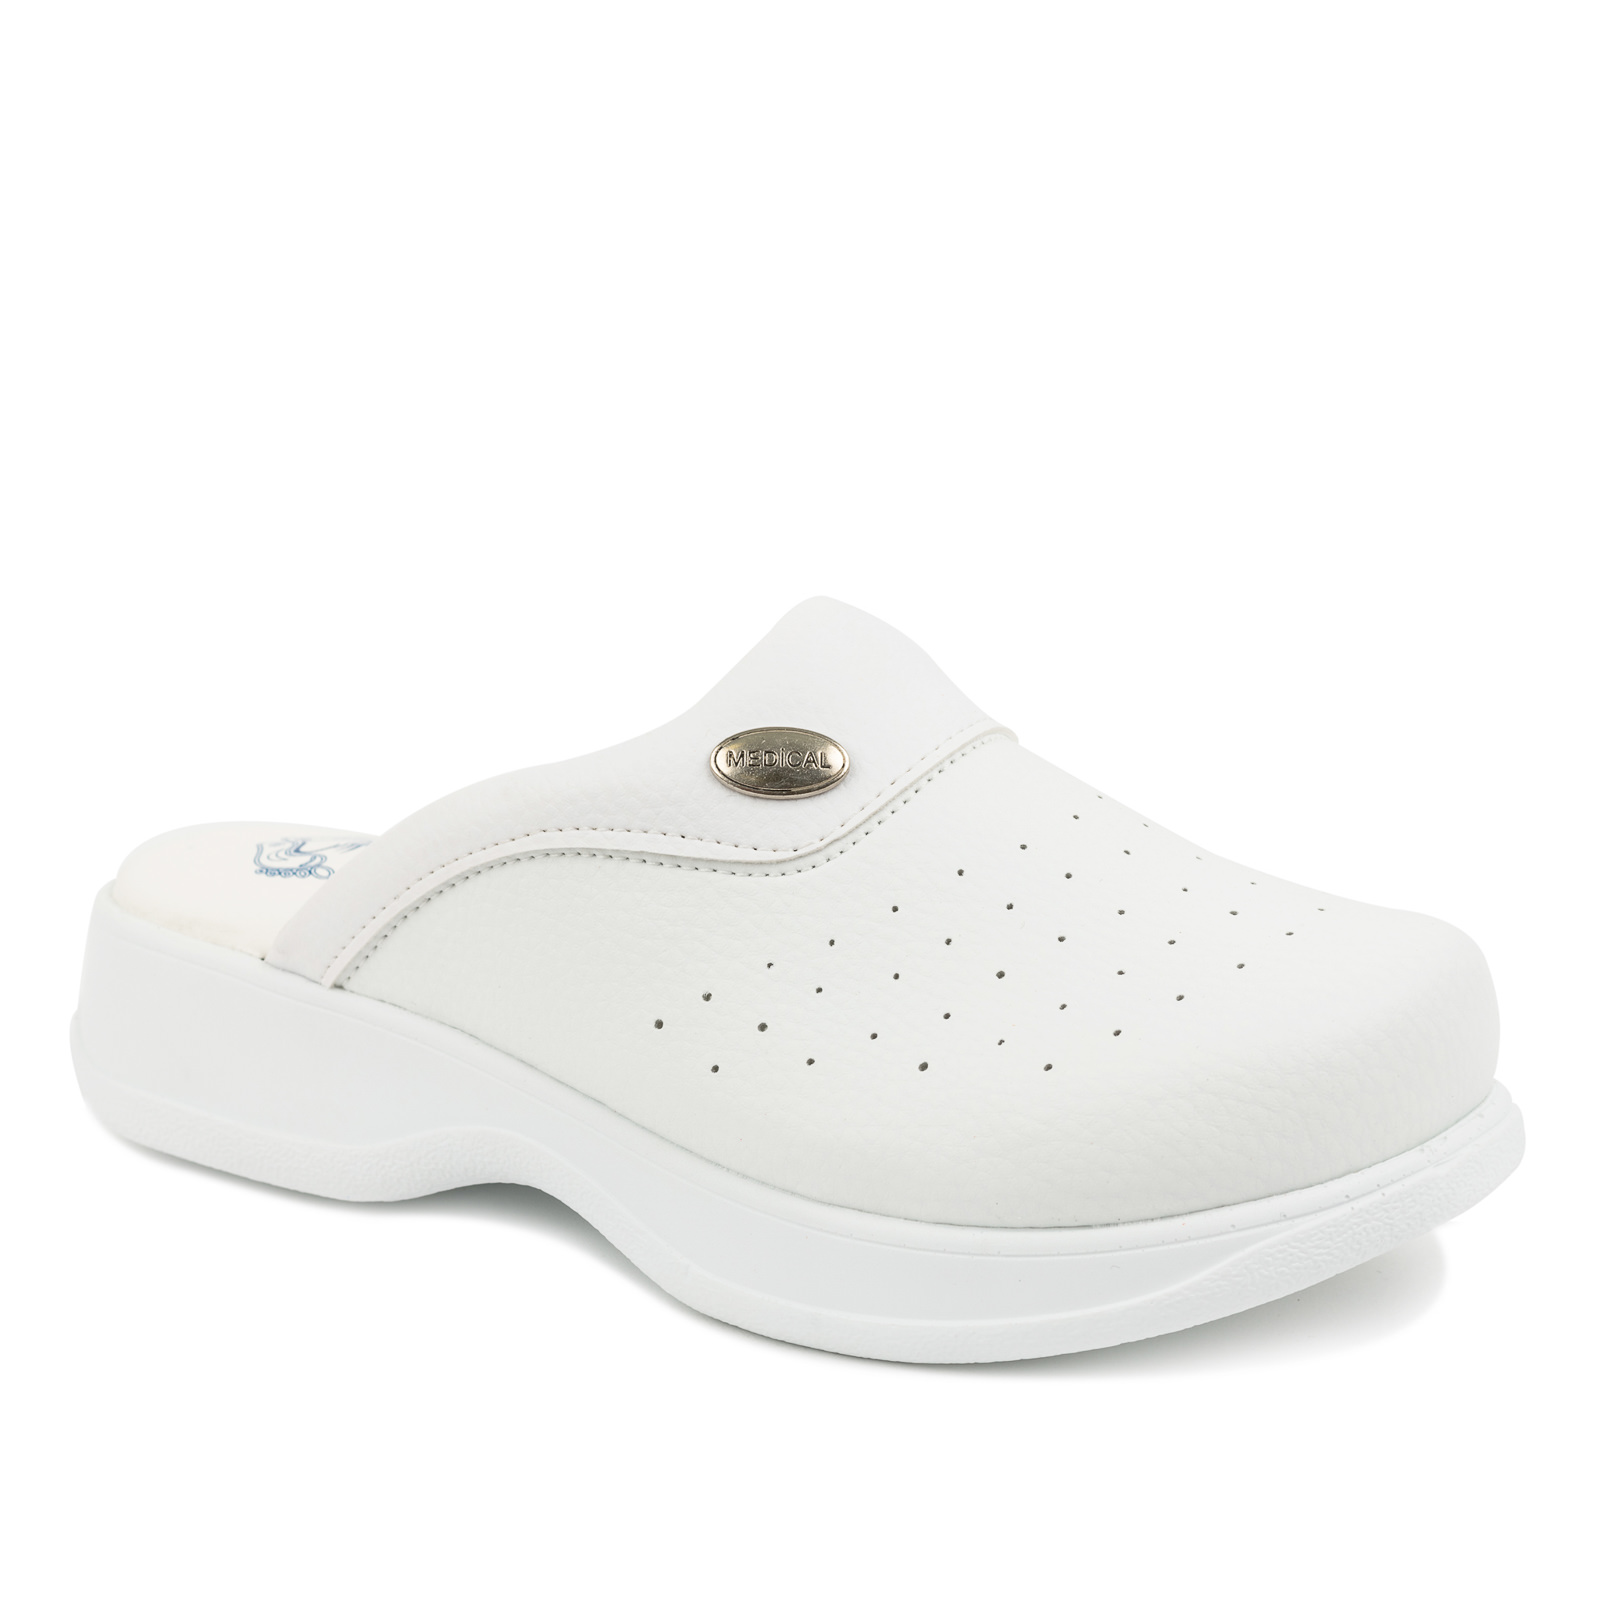 HOLLOW MEDICAL SOLE CLOGS - WHITE